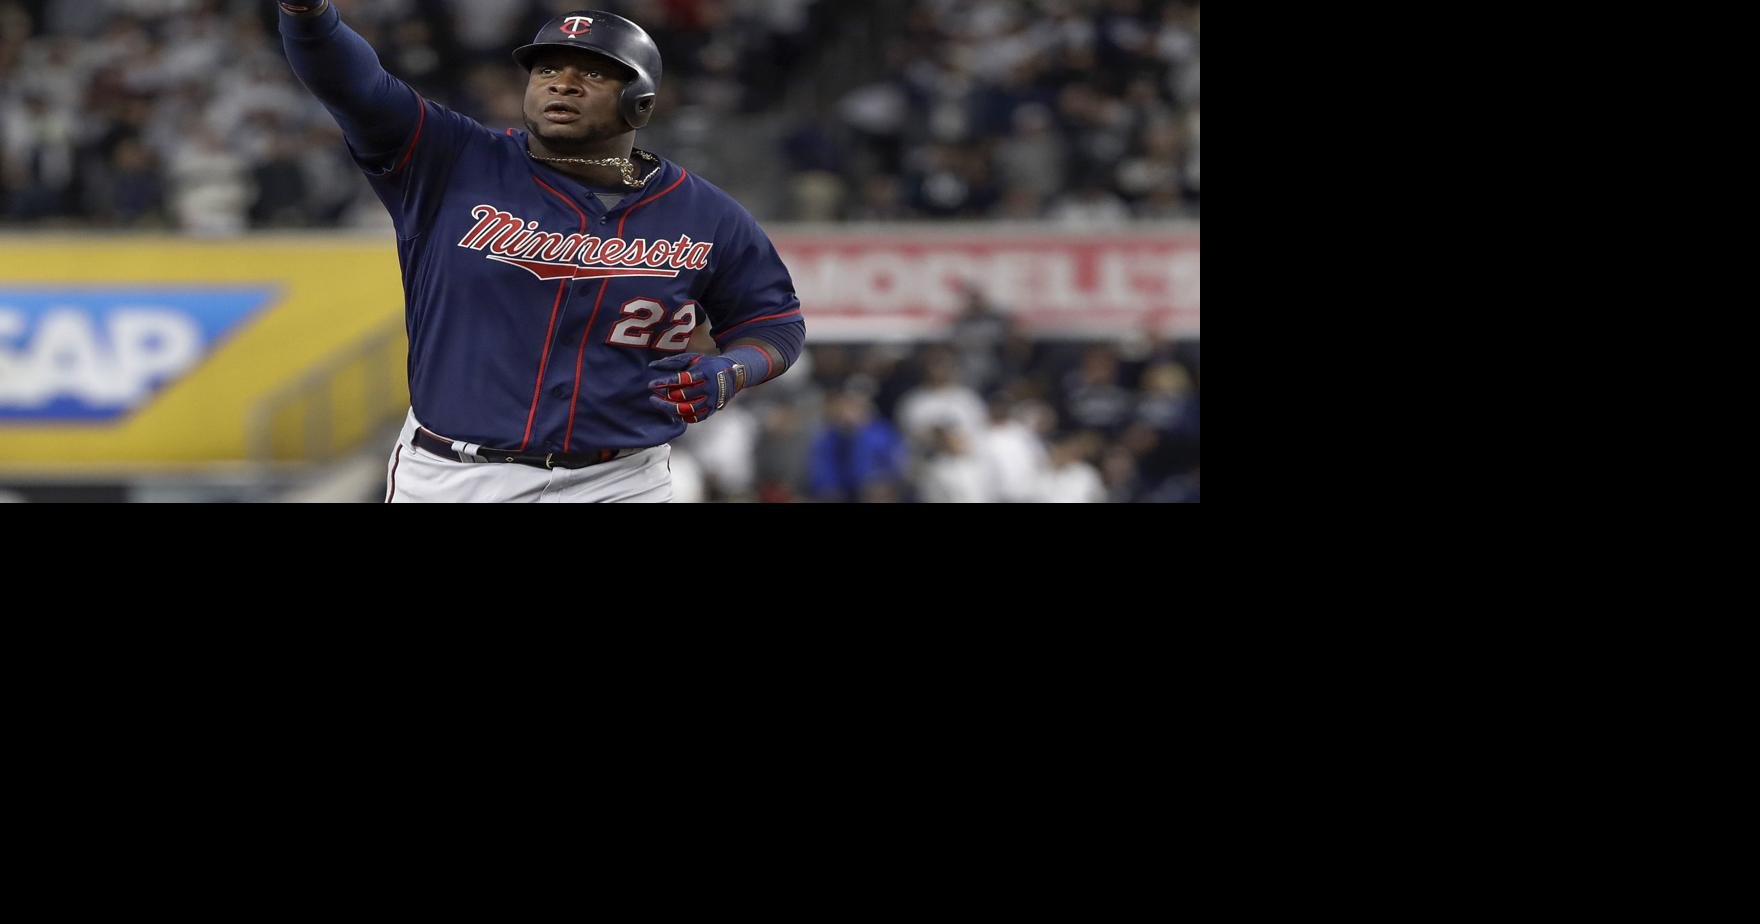 Jim Souhan: Miguel Sano's contract is big — to match his personality